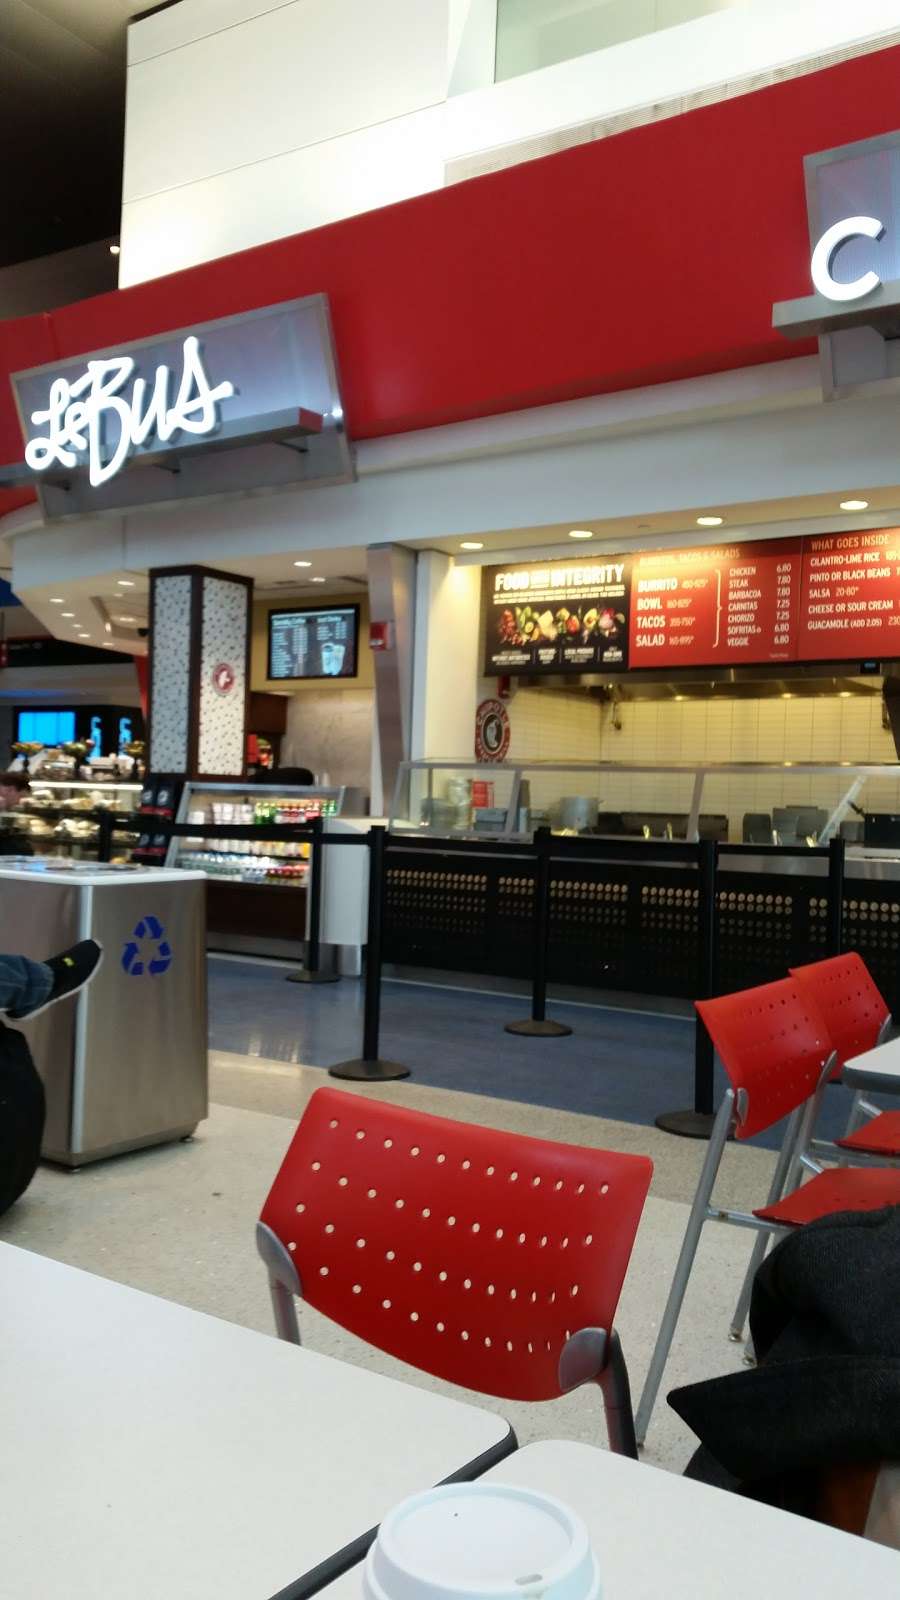 Le Bus Airport Cafe | Terminal F Food Court, Departures Rd, Philadelphia, PA 19153 | Phone: (215) 478-2843